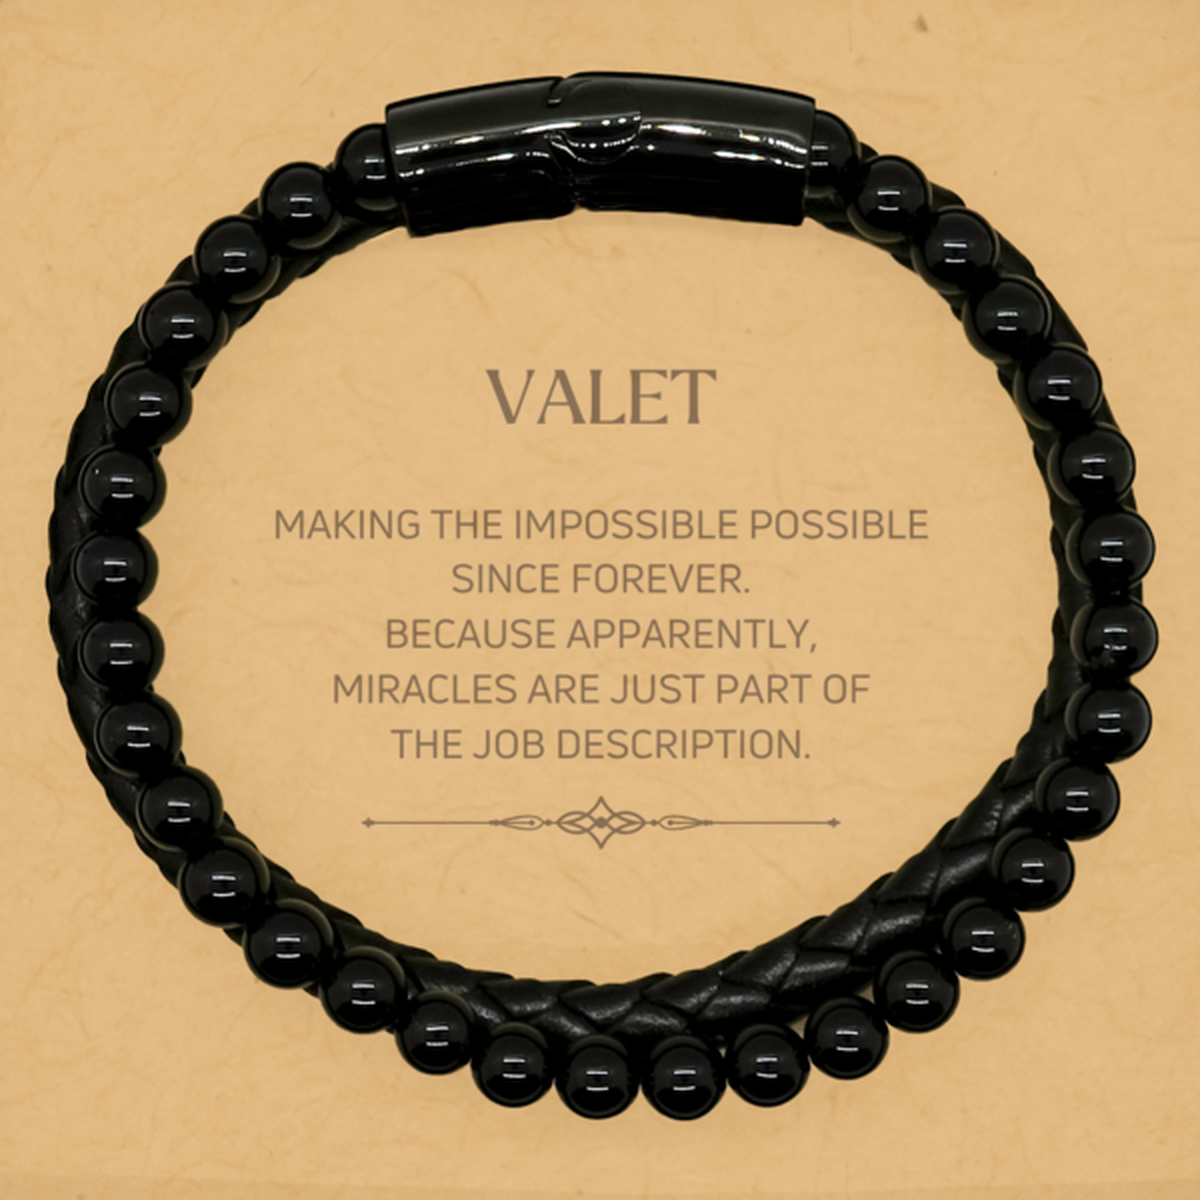 Funny Valet Gifts, Miracles are just part of the job description, Inspirational Birthday Stone Leather Bracelets For Valet, Men, Women, Coworkers, Friends, Boss